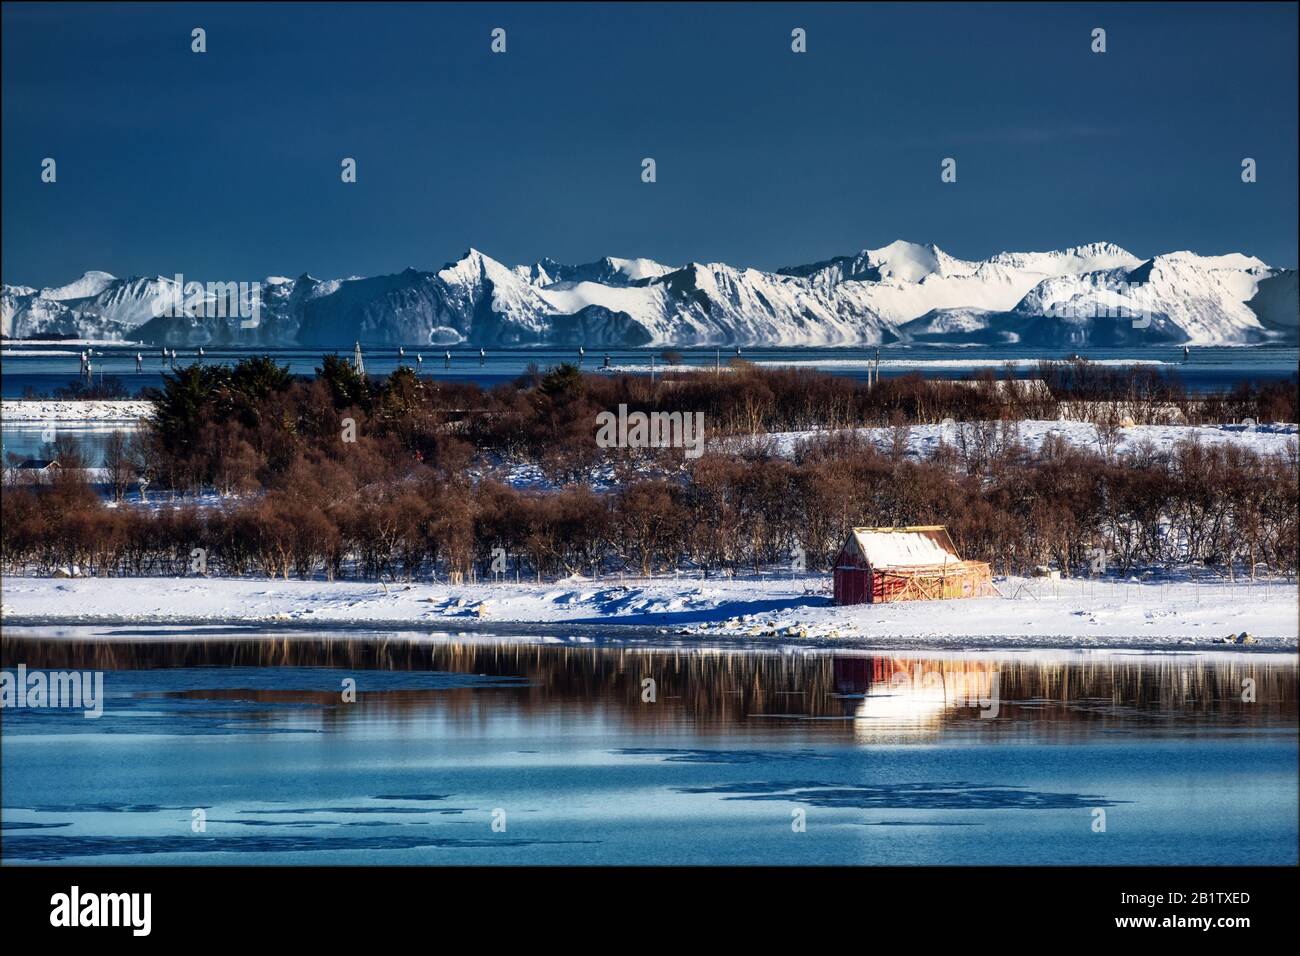 Red barn reflecting in water in Norway; winter landscape with mountains in the background Stock Photo